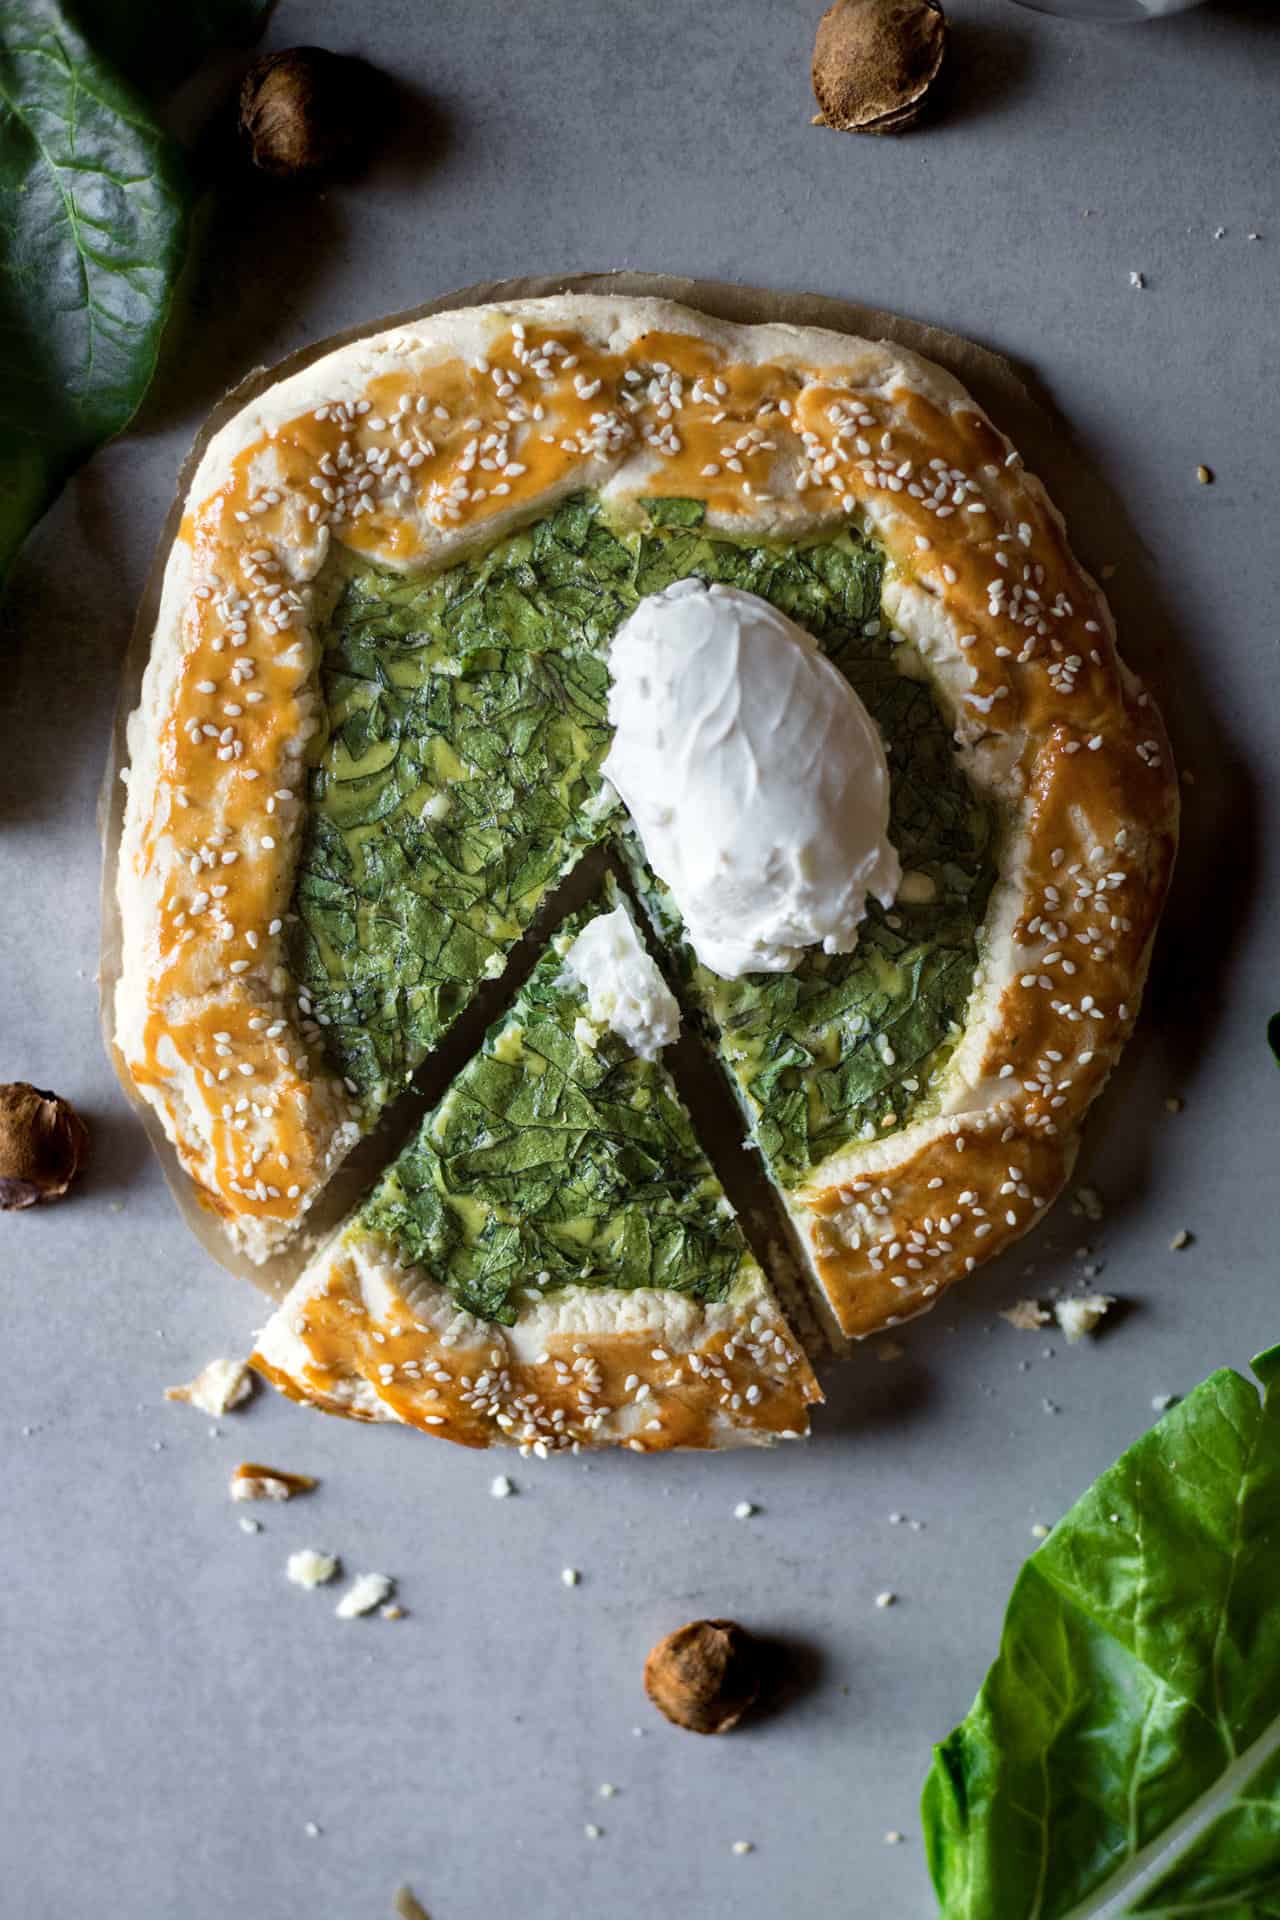 This Gluten-Free Galette With Chard and Feta is low FODMAP, healthy, flavorful, delicious with a super flaky texture. Plus super simple and easy to make!